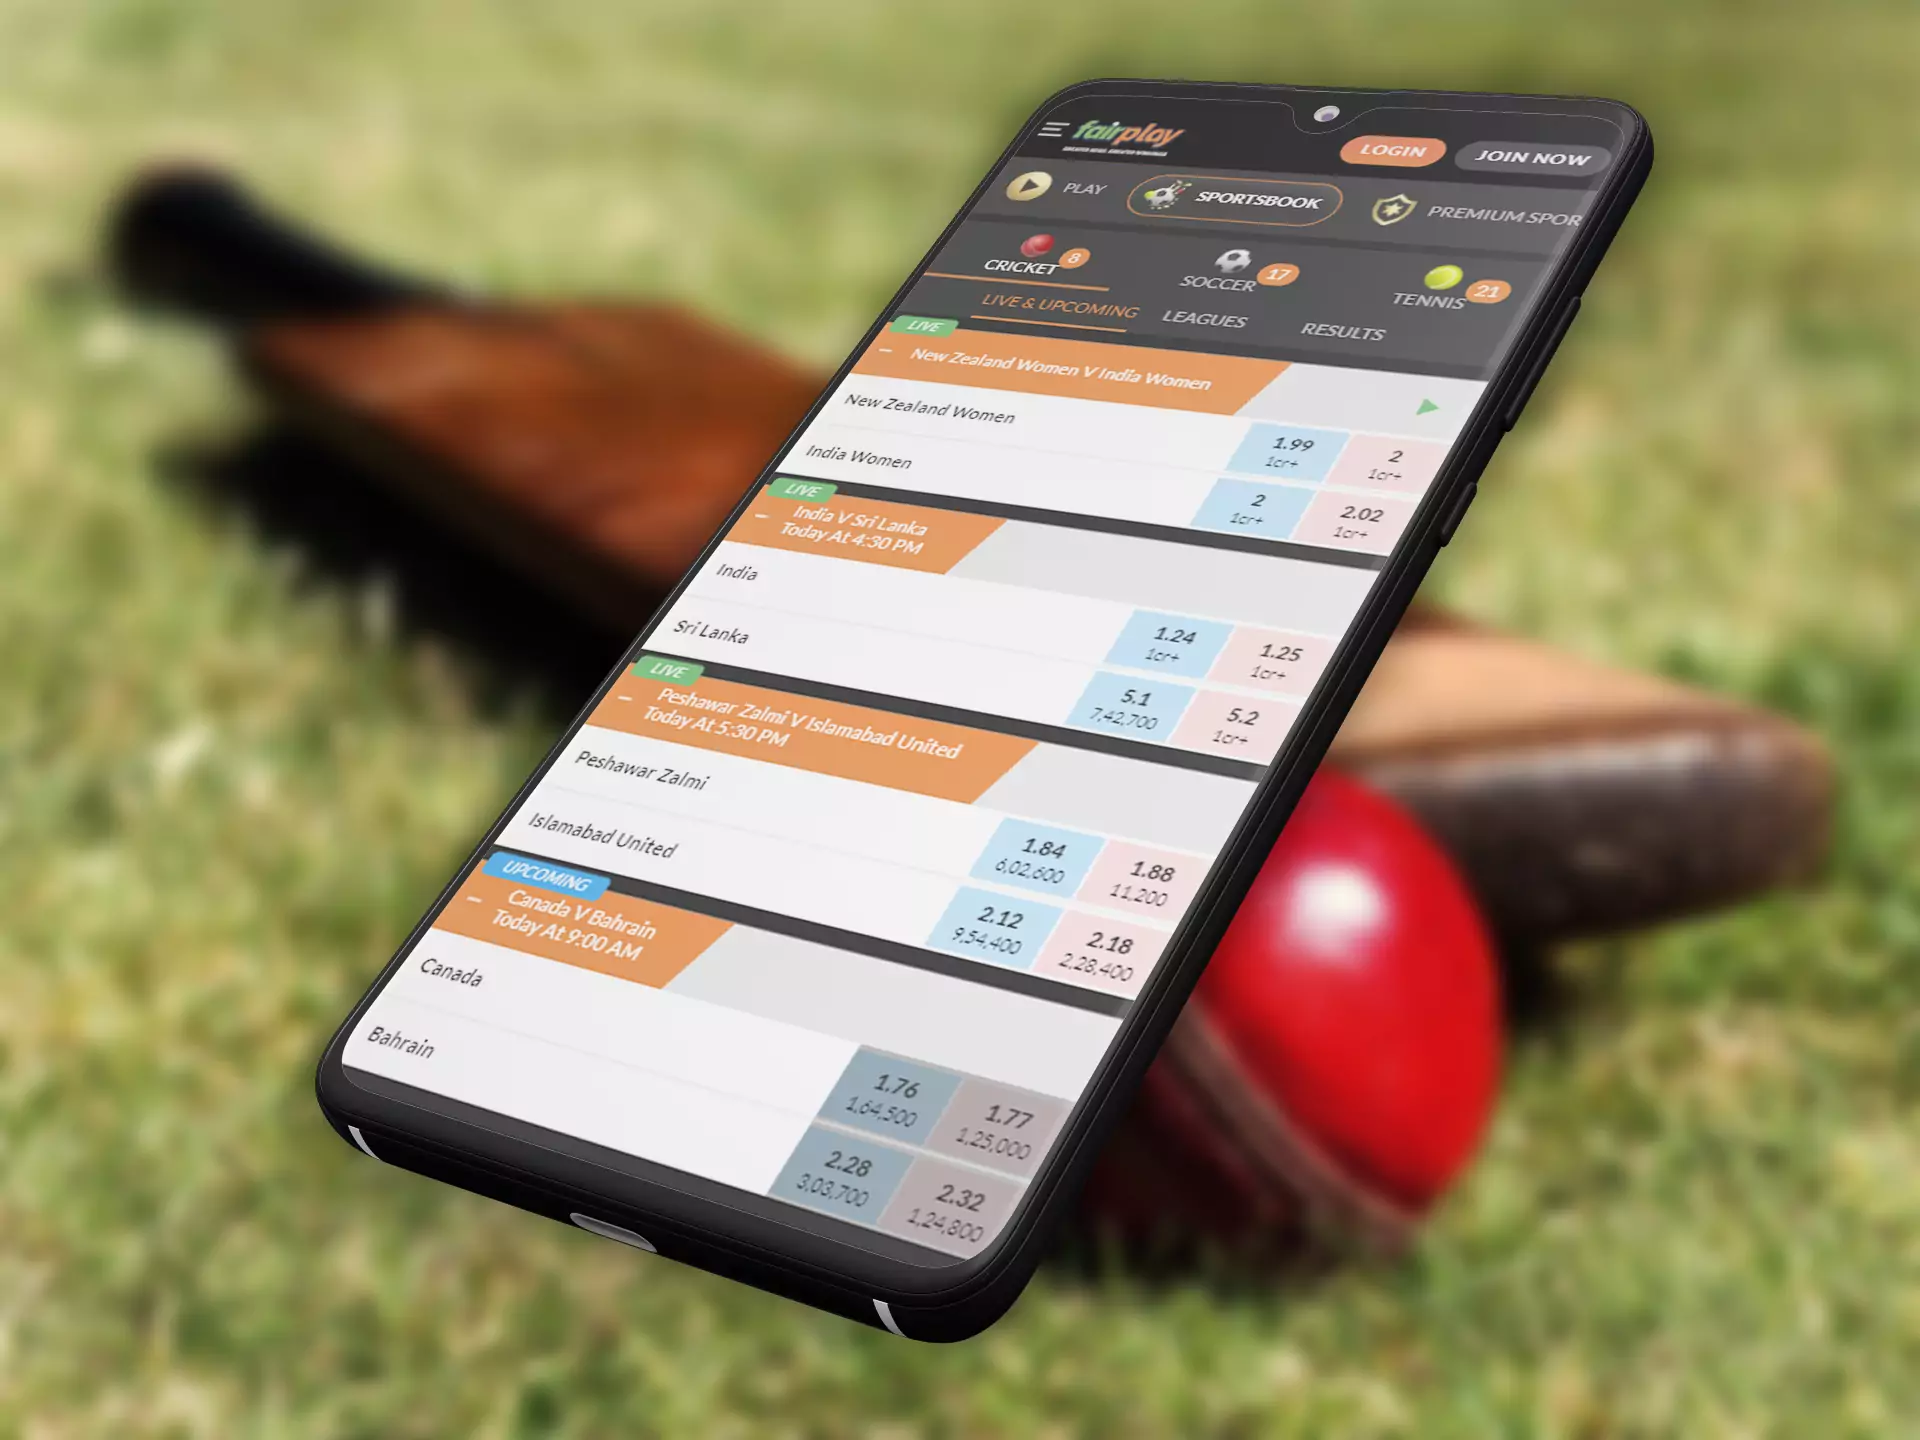 The Fairplay app supports betting on cricket matches.